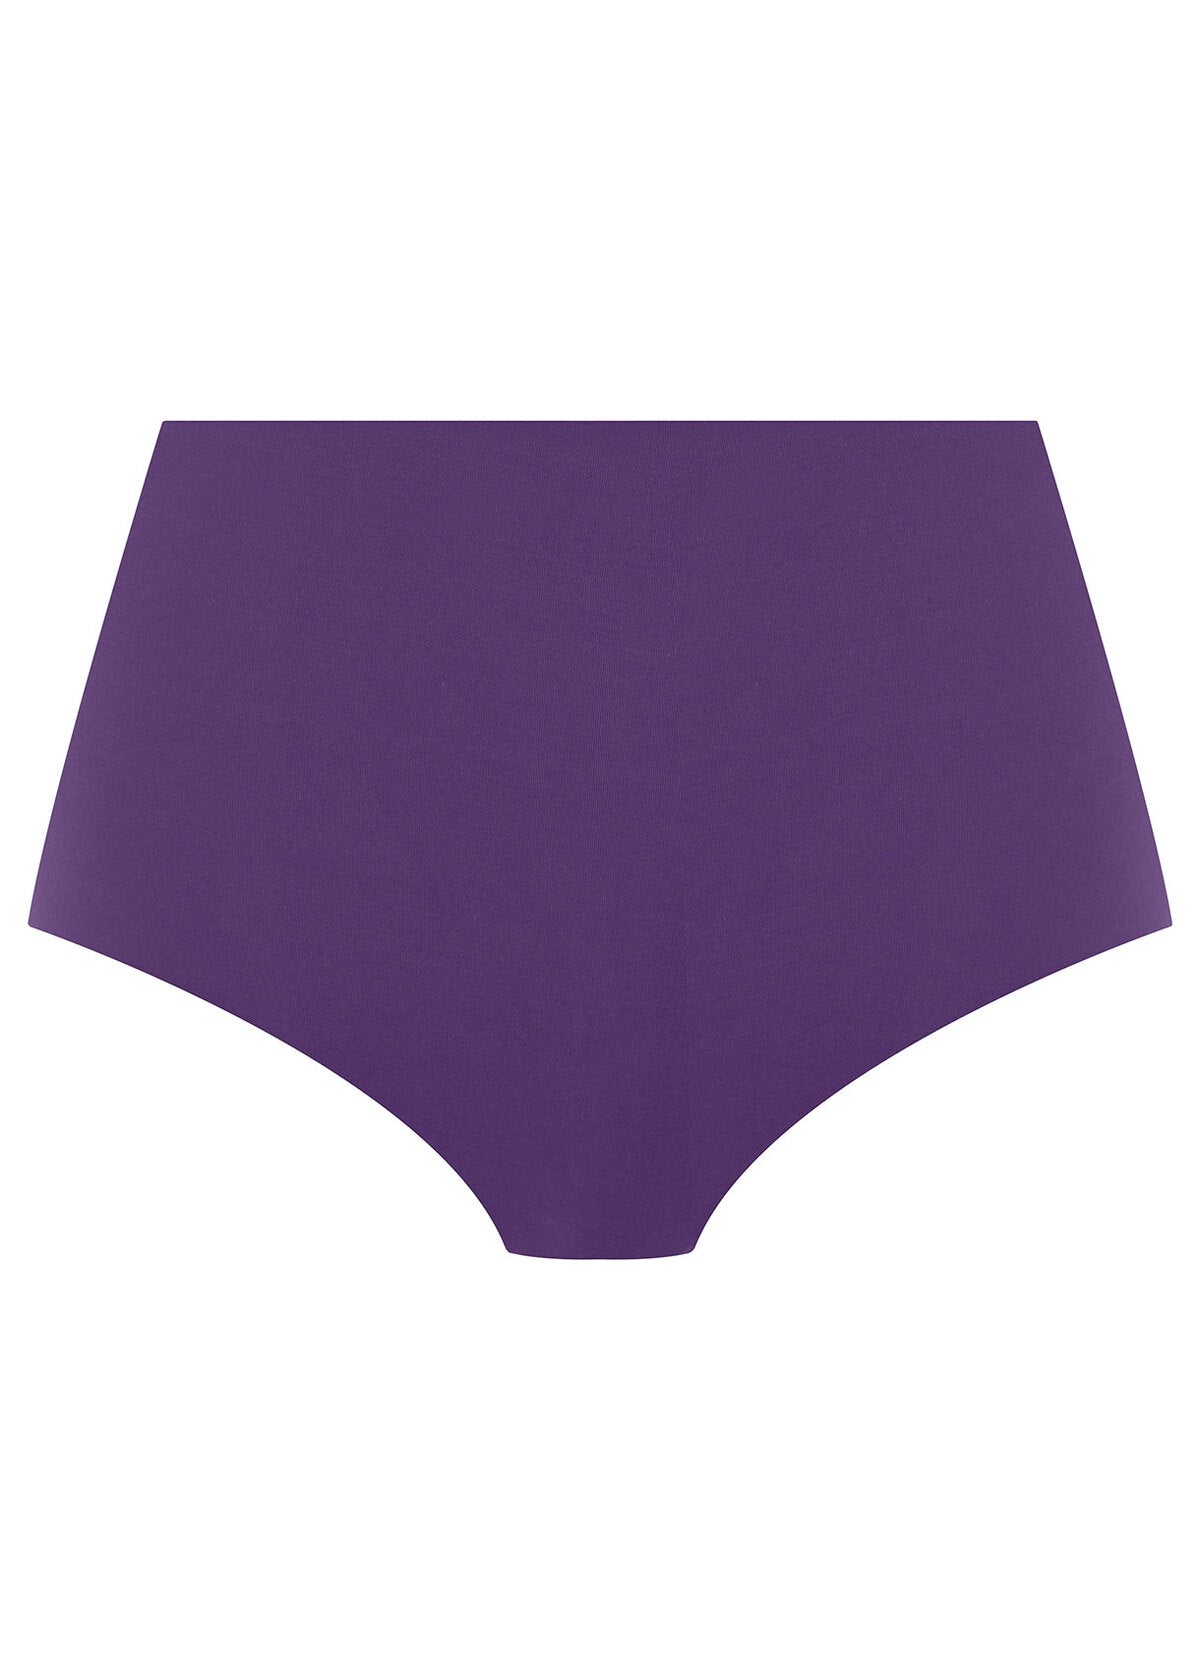 Fantasie Smoothease Invisible Stretch Full Brief - Blackberry